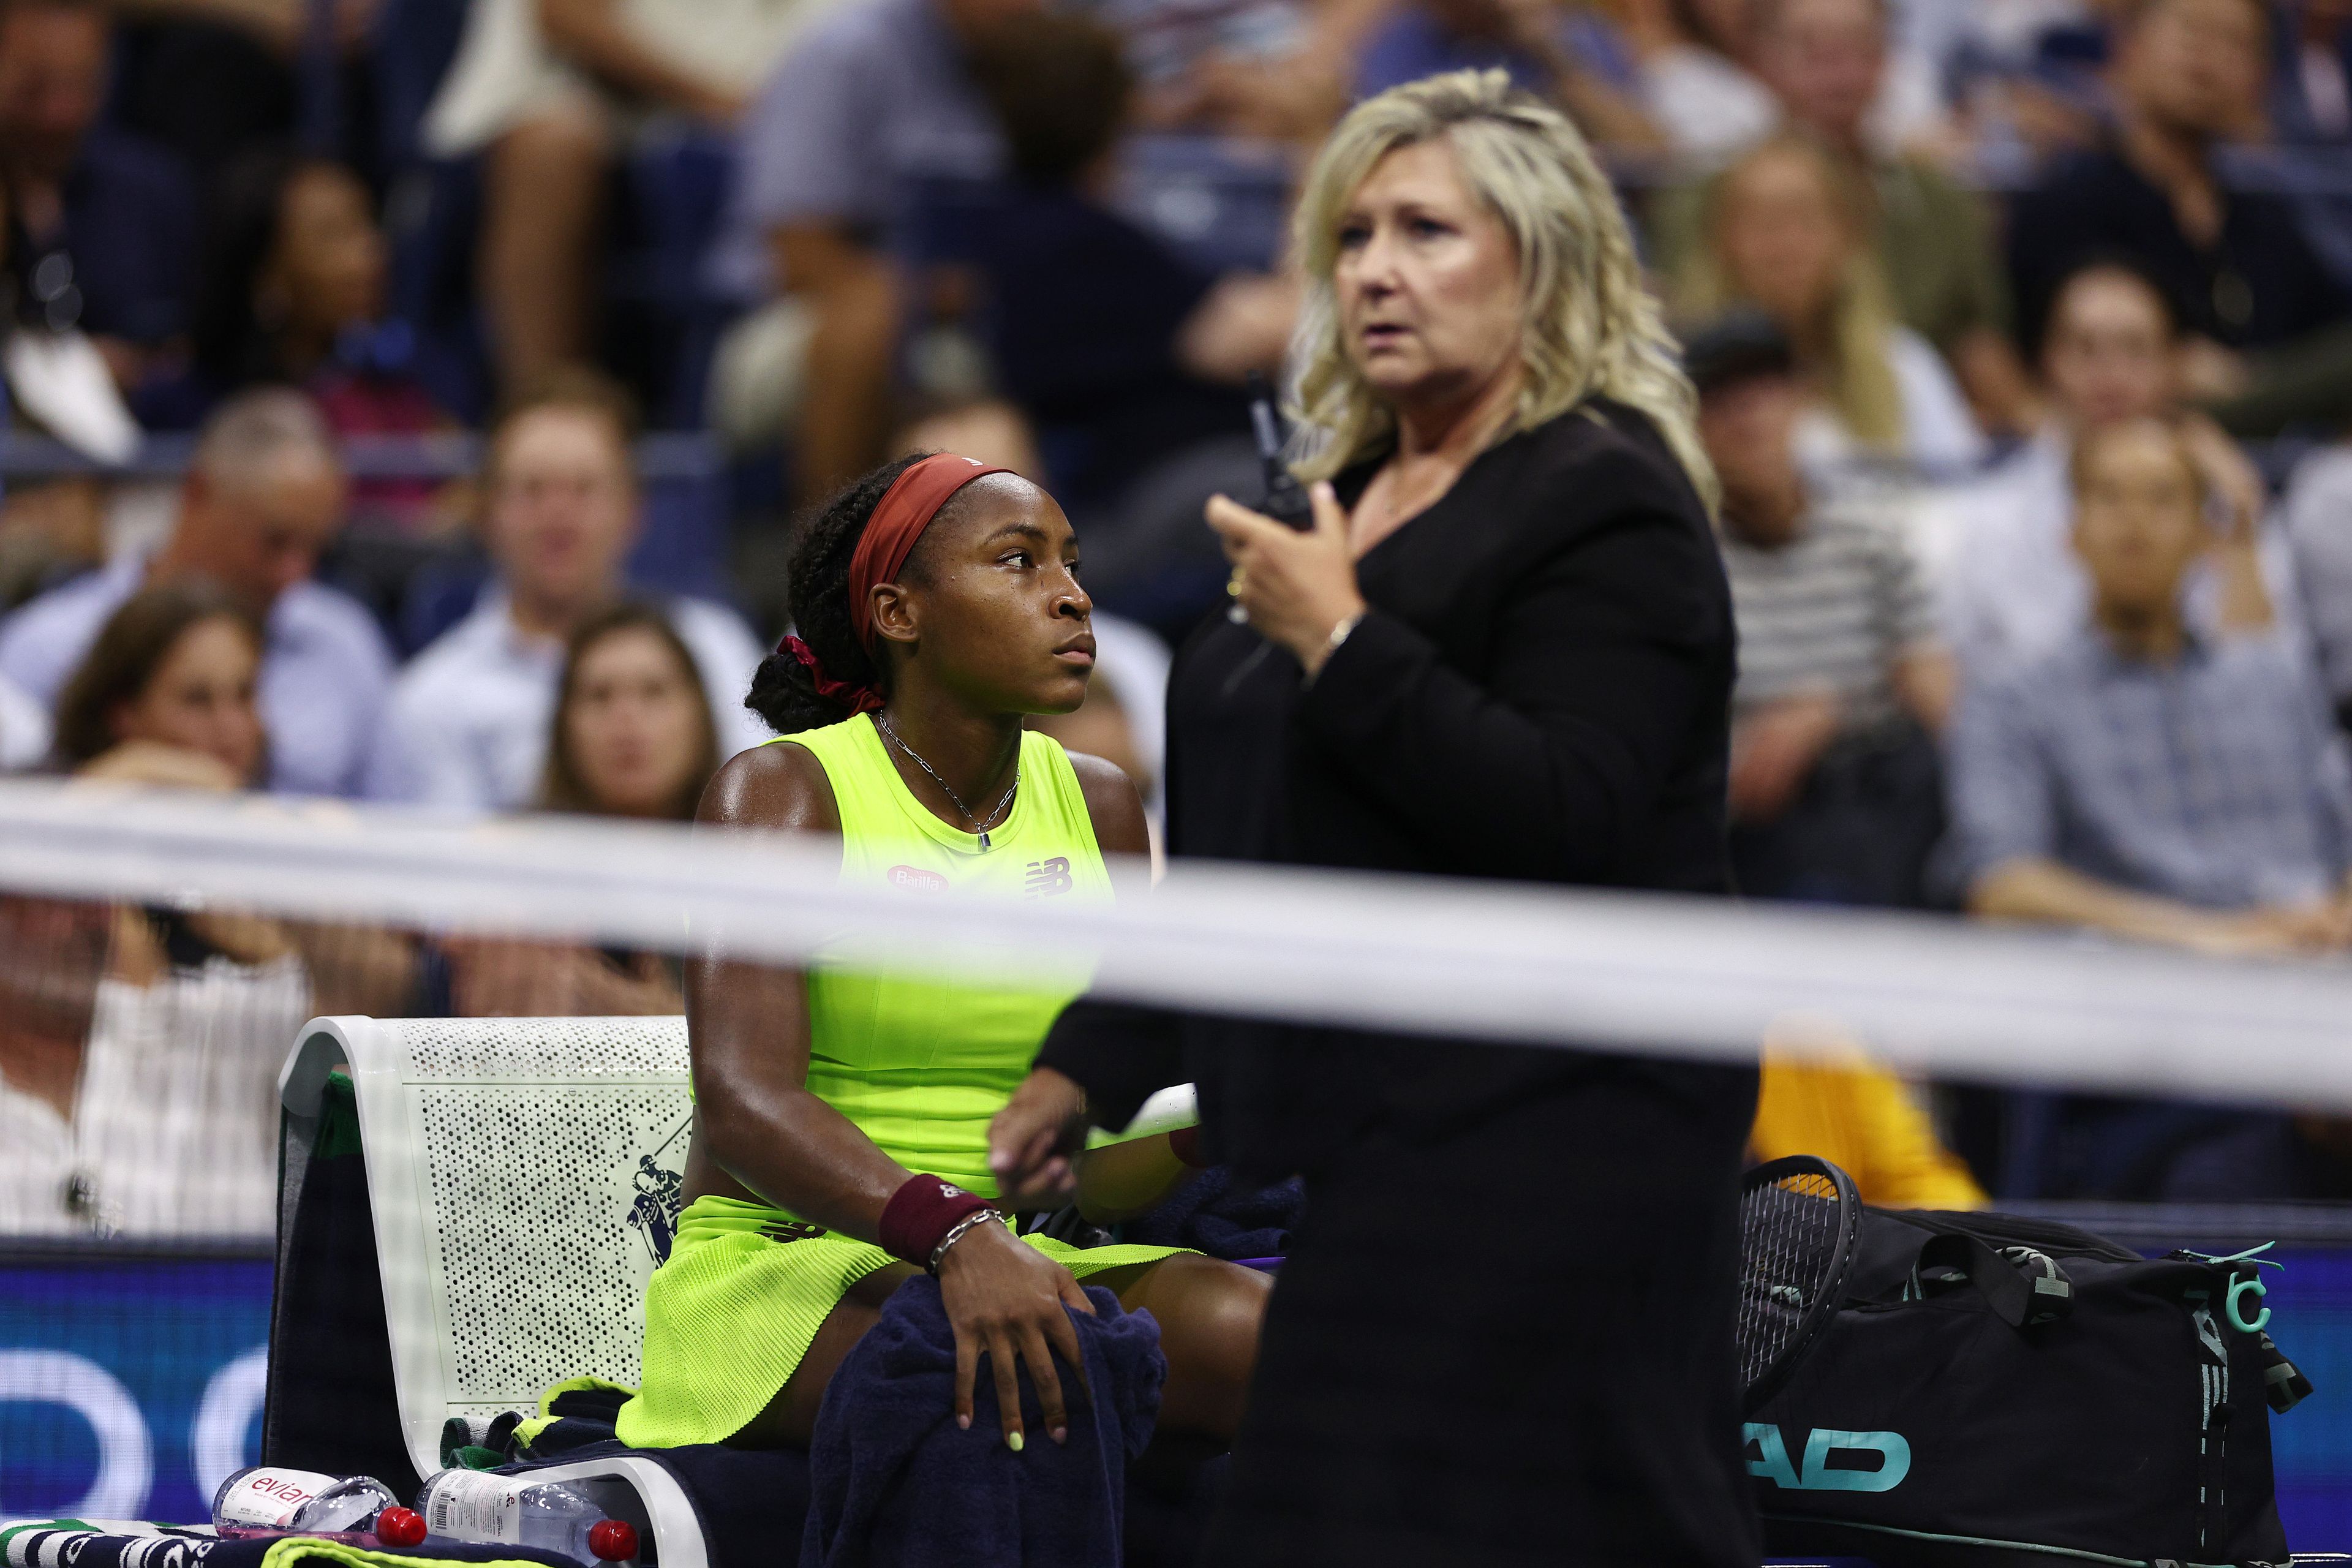 An official speaks to Coco Gauff during the break in play.